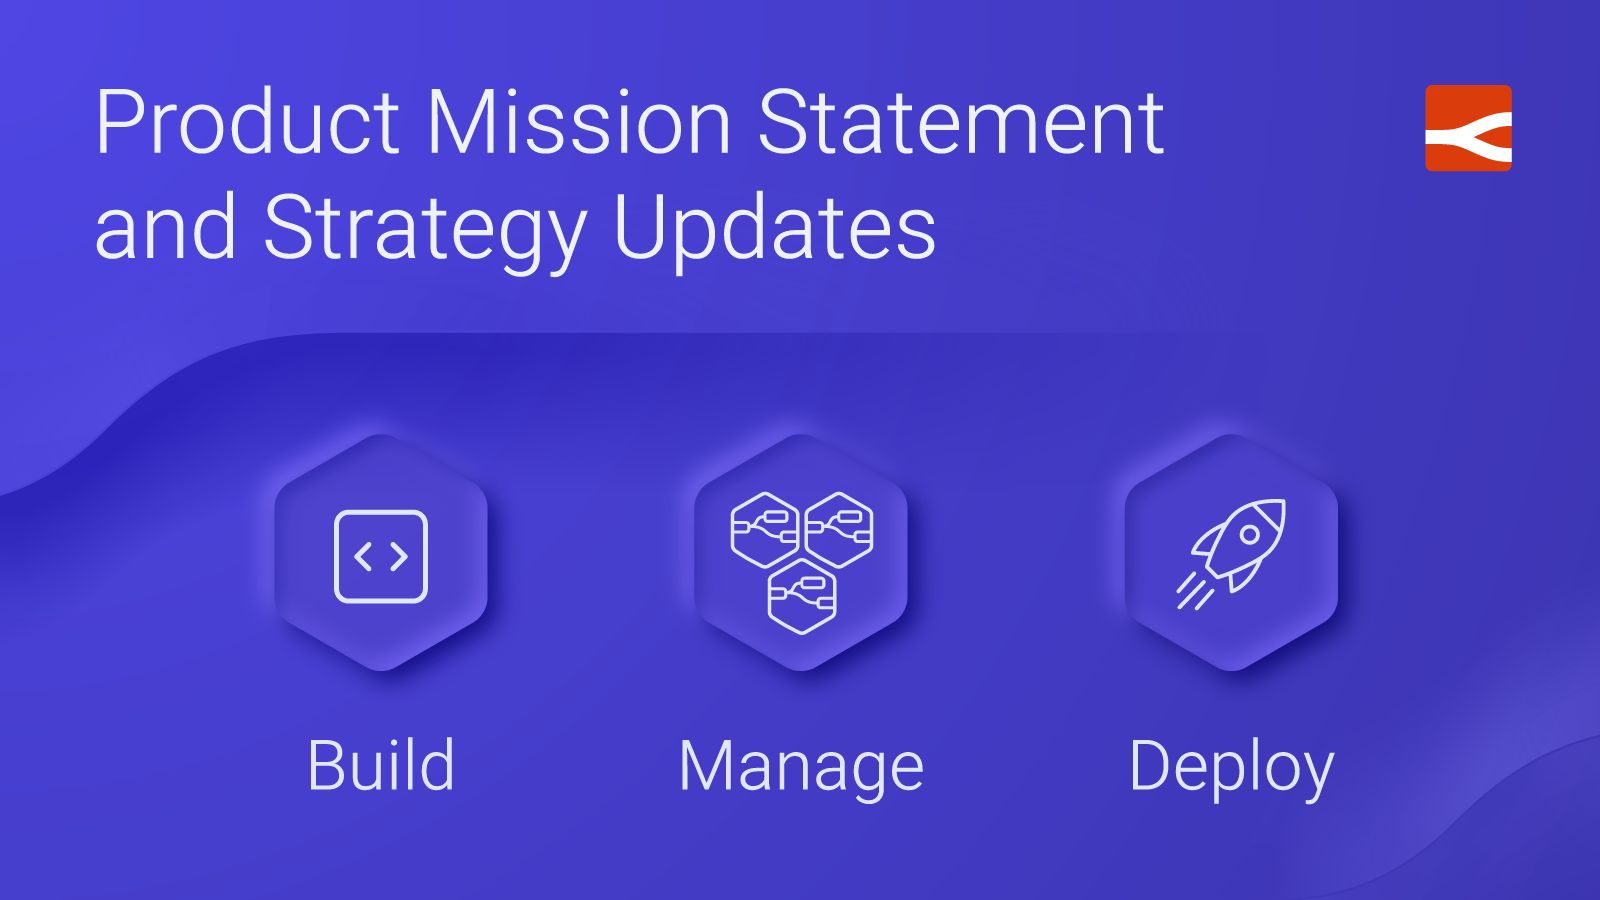 Image representing Product Mission Statement and Strategy Updates